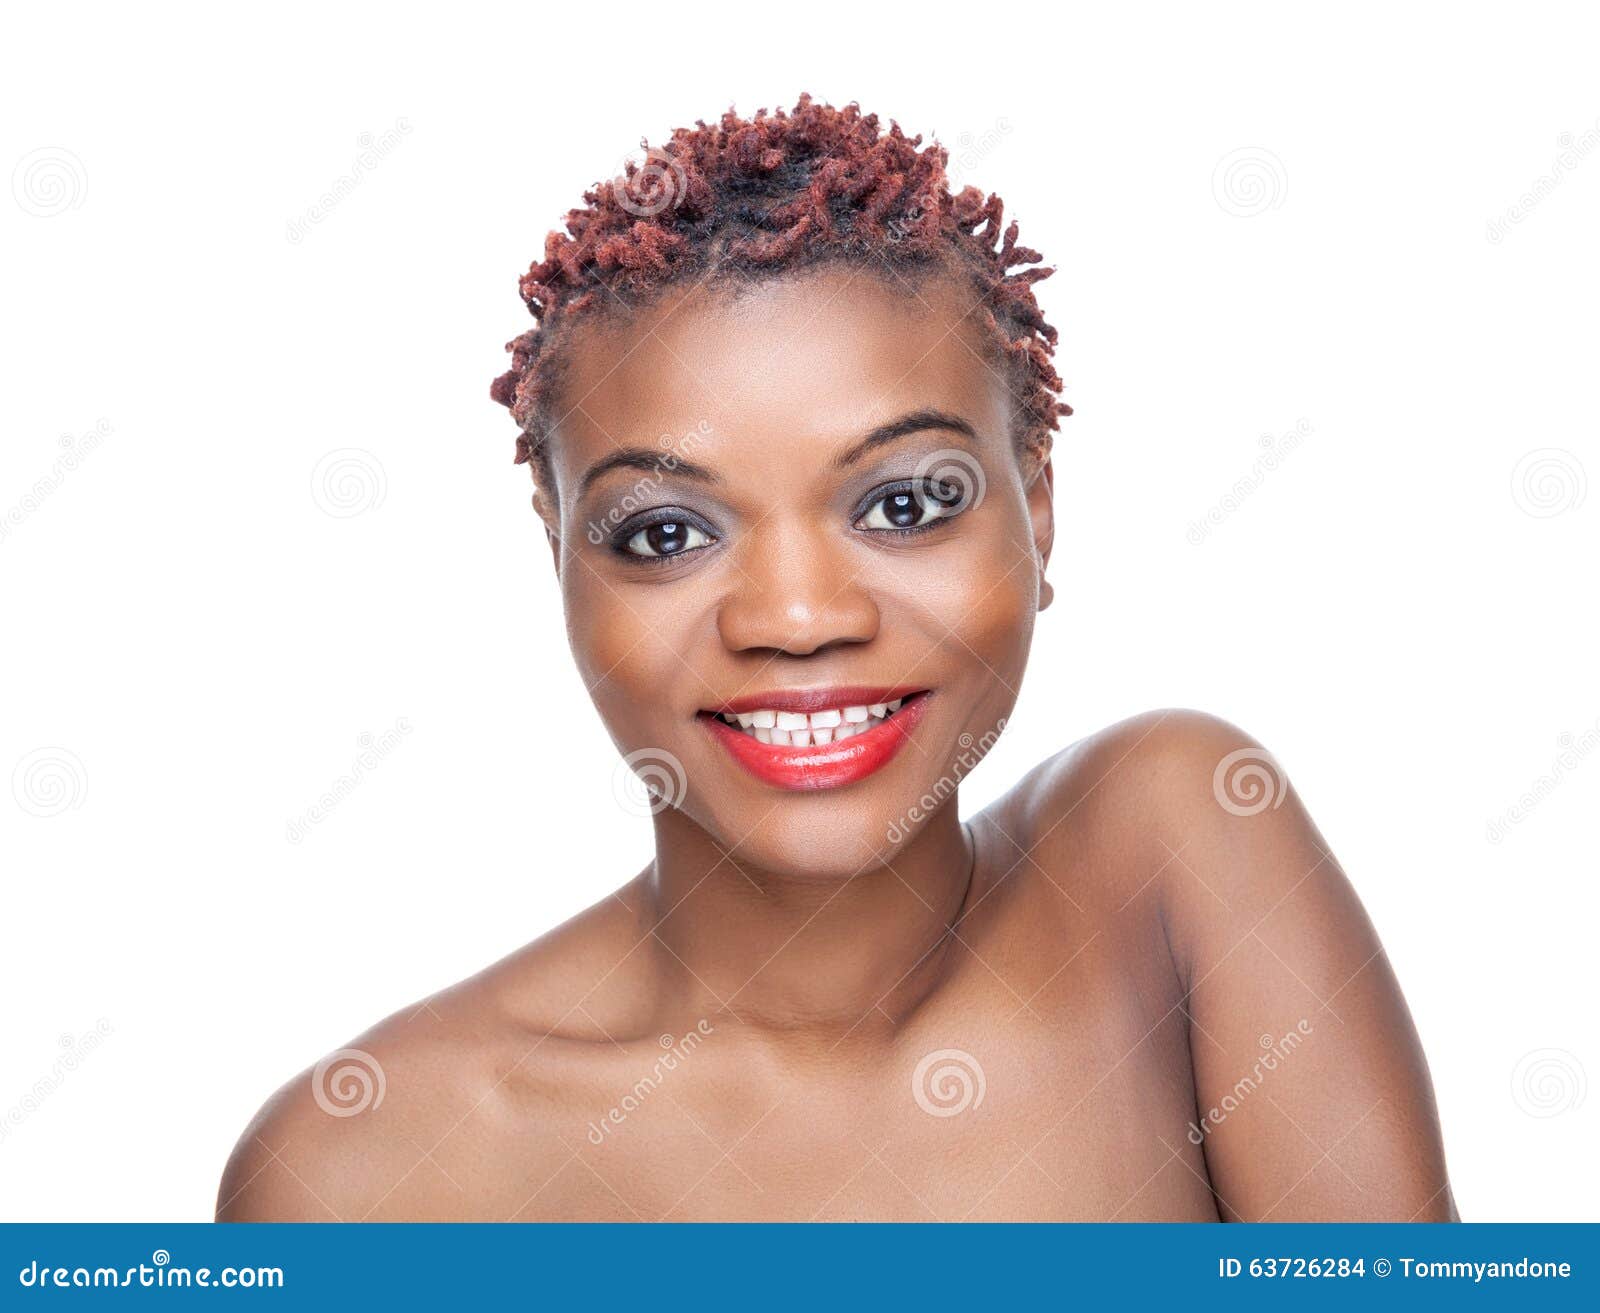 Black Beauty with Short Spiky Hair Stock Photo - Image of complexion, cute:  63726284